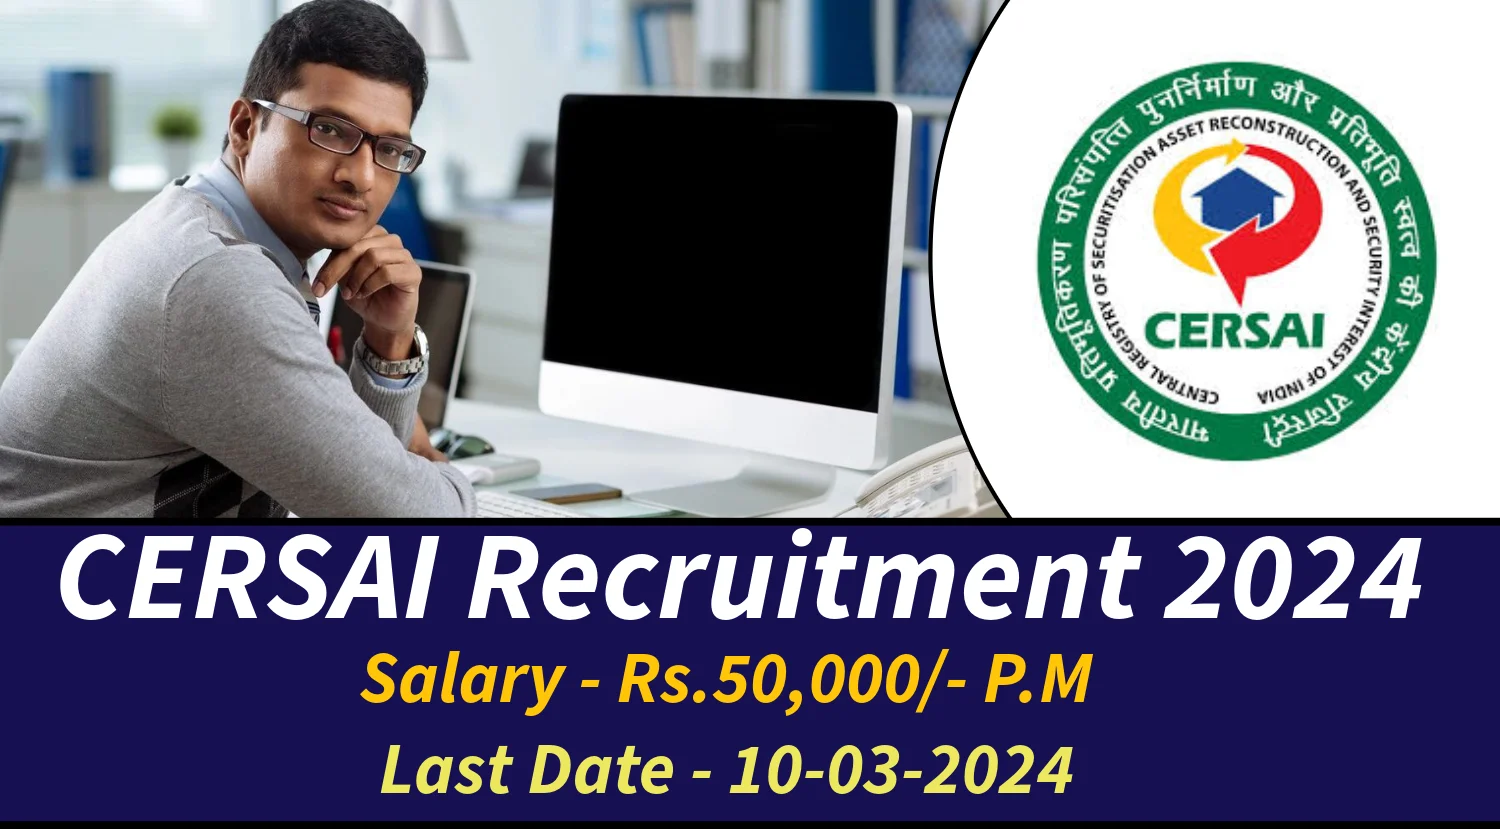 CERSAI Recruitment 2024 for Various Managerial and More Vacancies